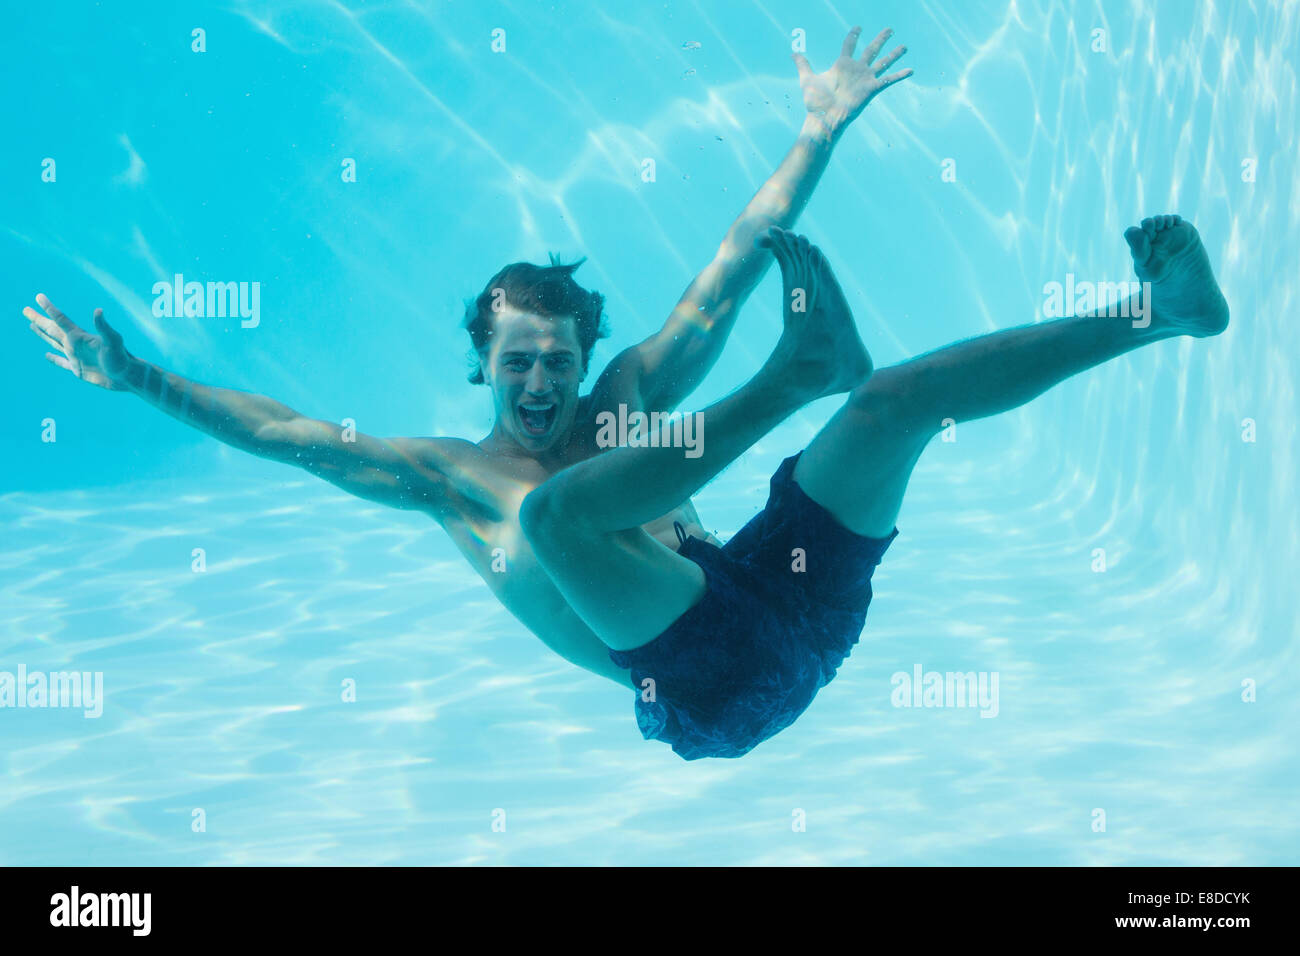 Young man swimming underwater Banque D'Images